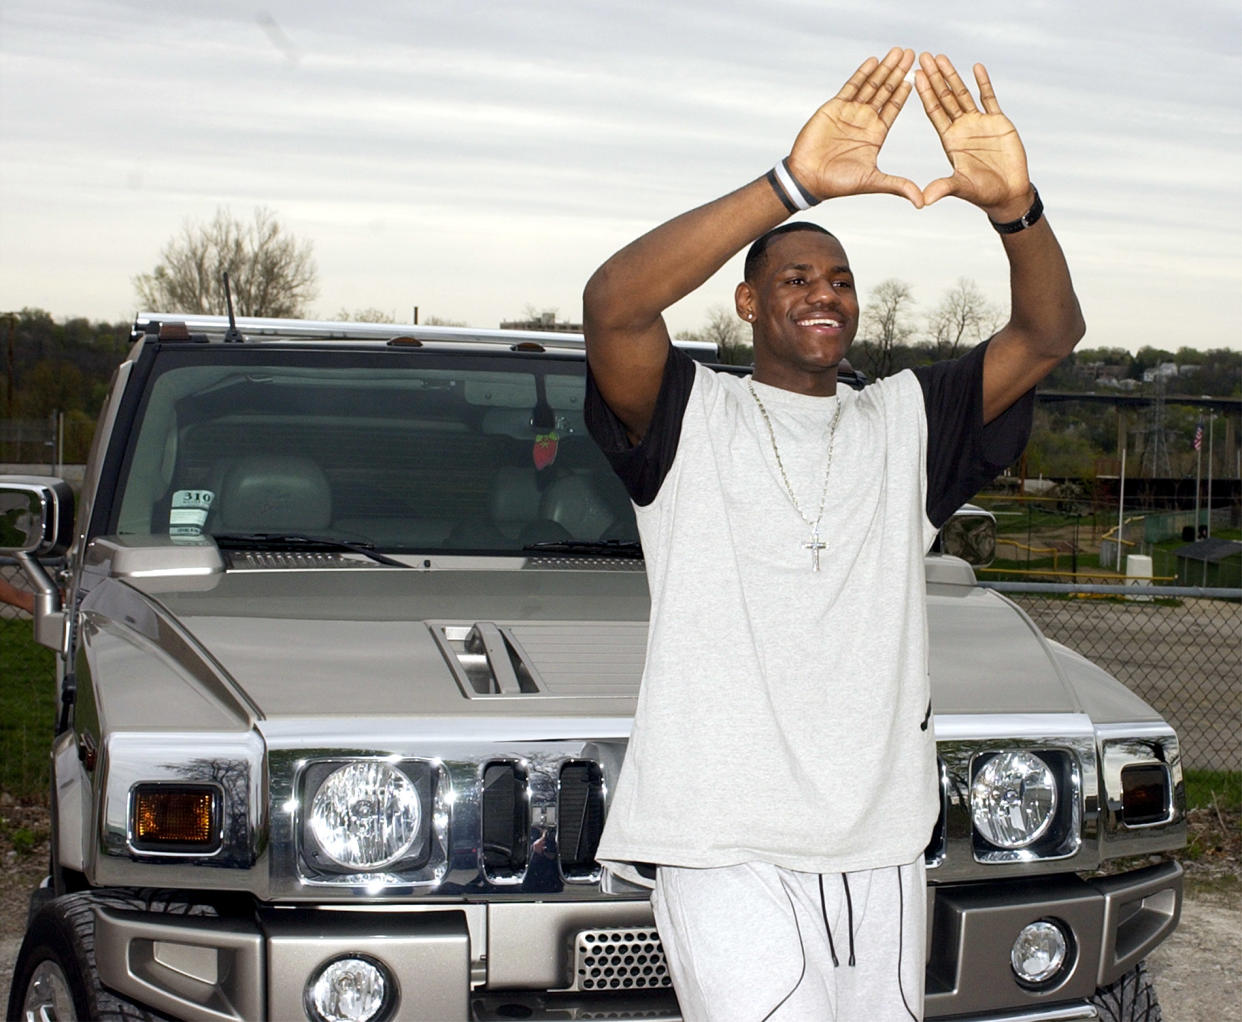 LeBron James poses in front of his Hummer after declaring for the NBA draft in April 2003. (AP)